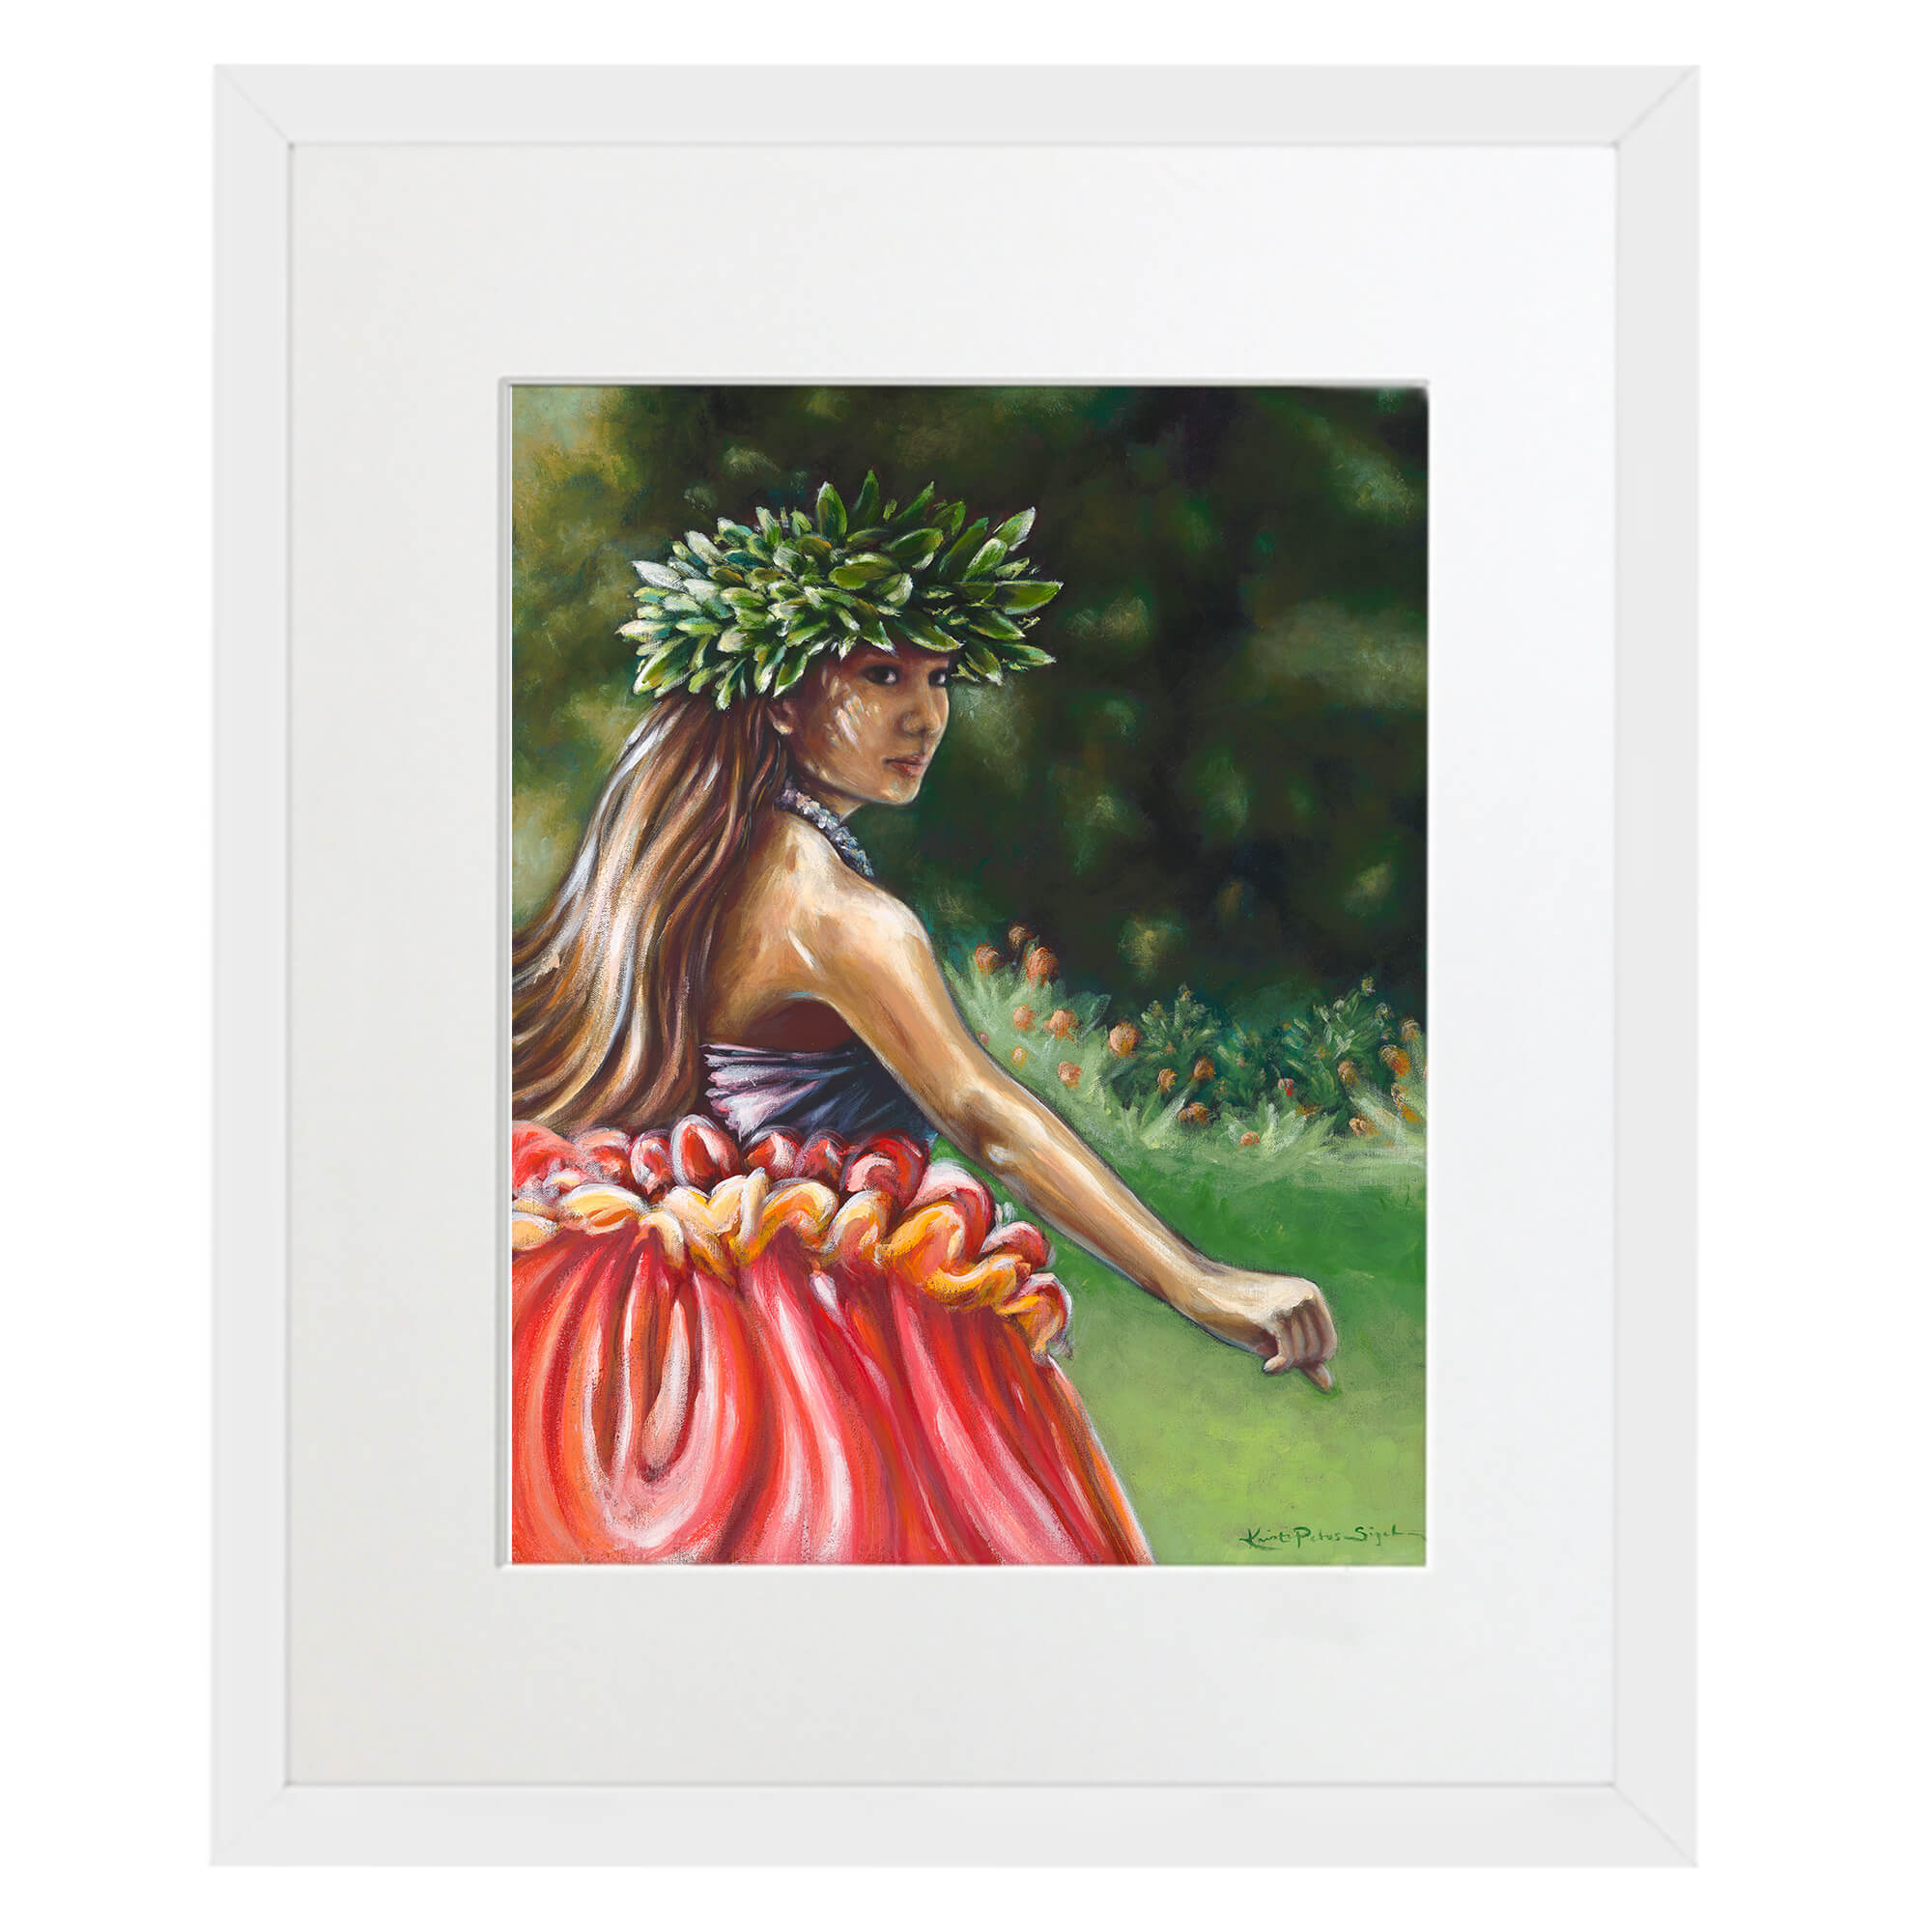 Matted art print with white frame featuring a red skirt   by hawaii artist Kristi Petosa